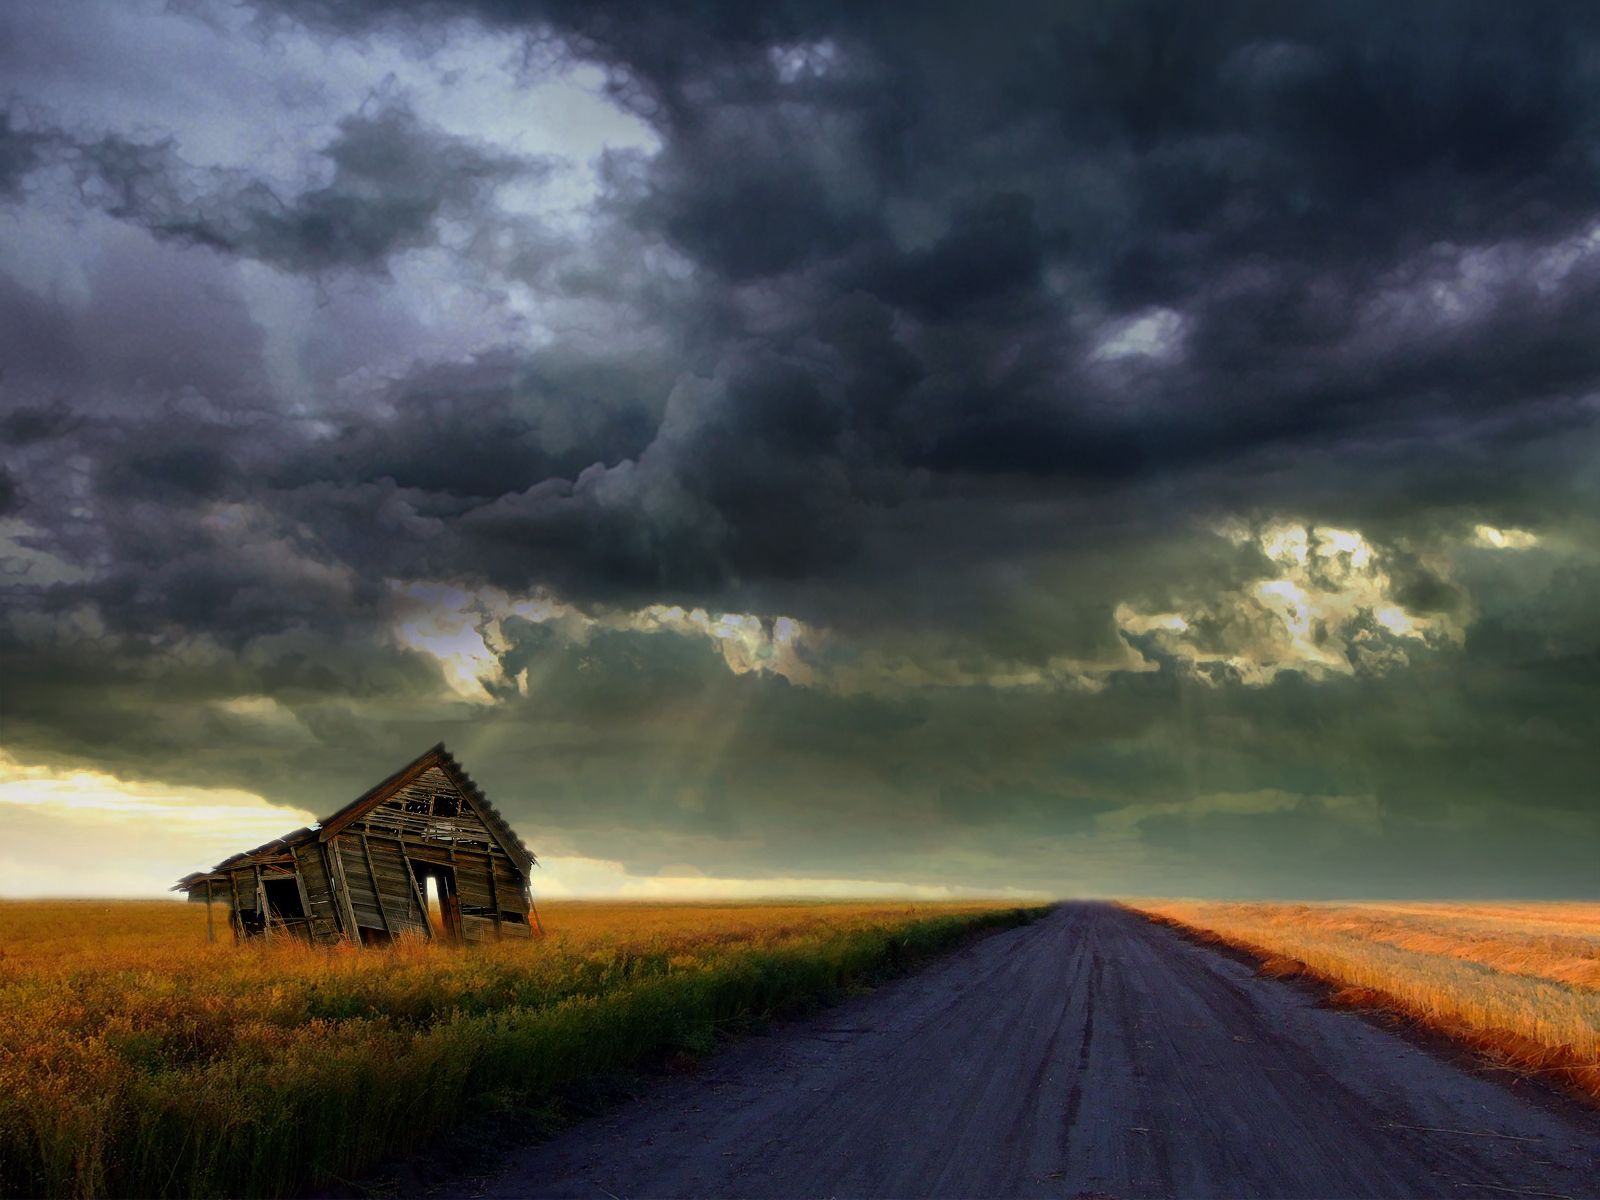 Mysterious Open Road Painting - Storm Wallpaper For Computer , HD Wallpaper & Backgrounds